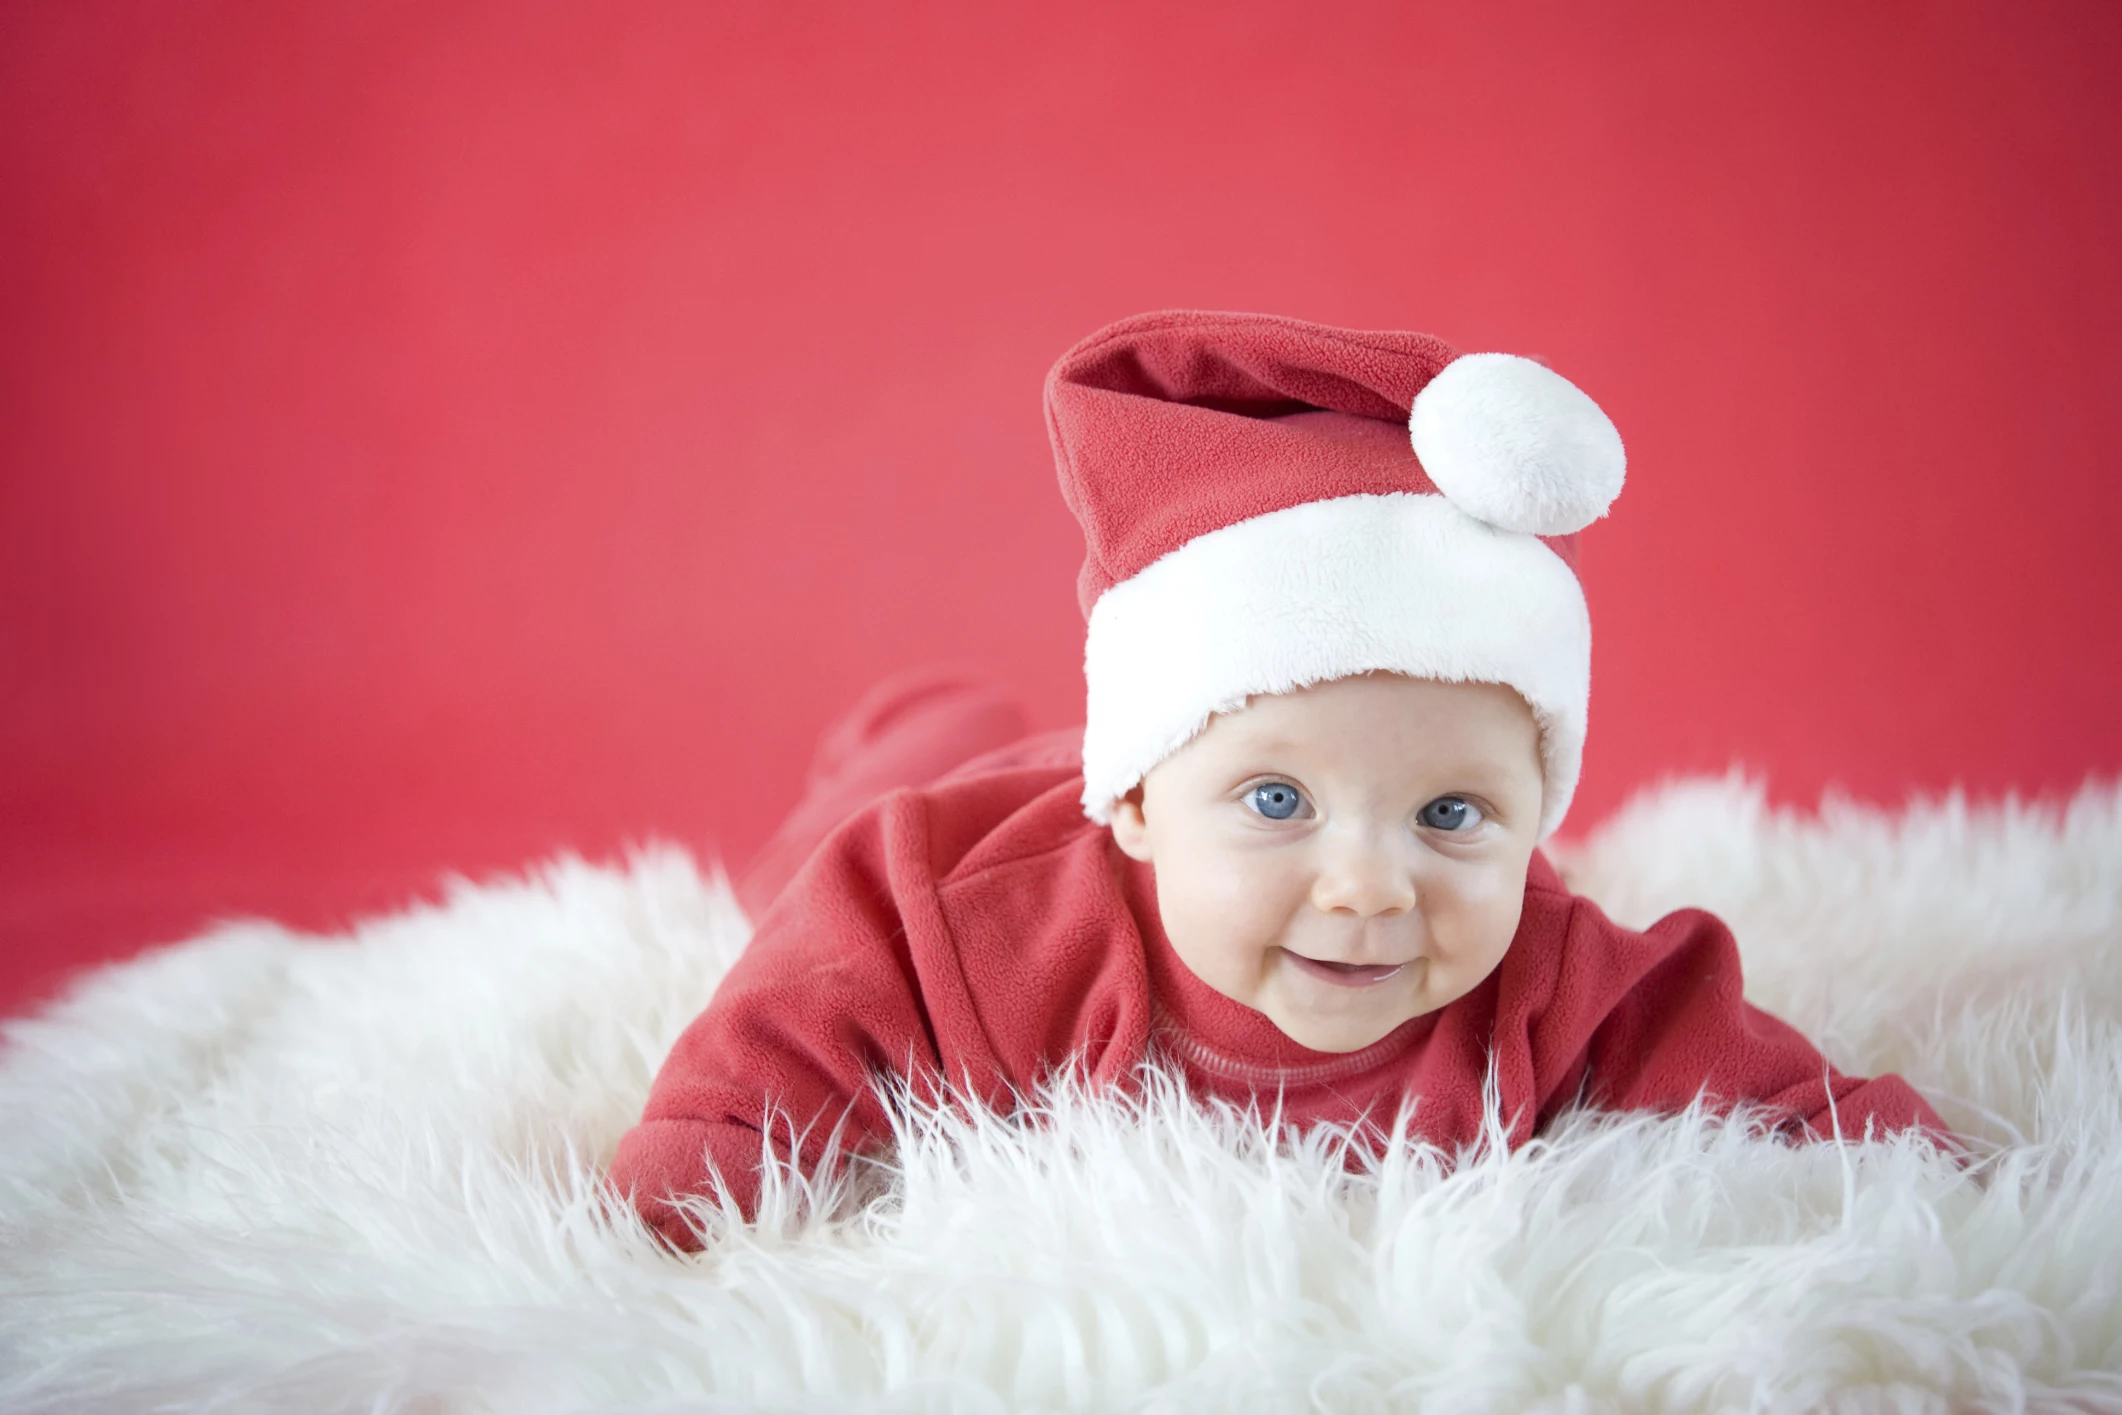 It's Time to Vote for the Cutest Santa Baby in East Texas